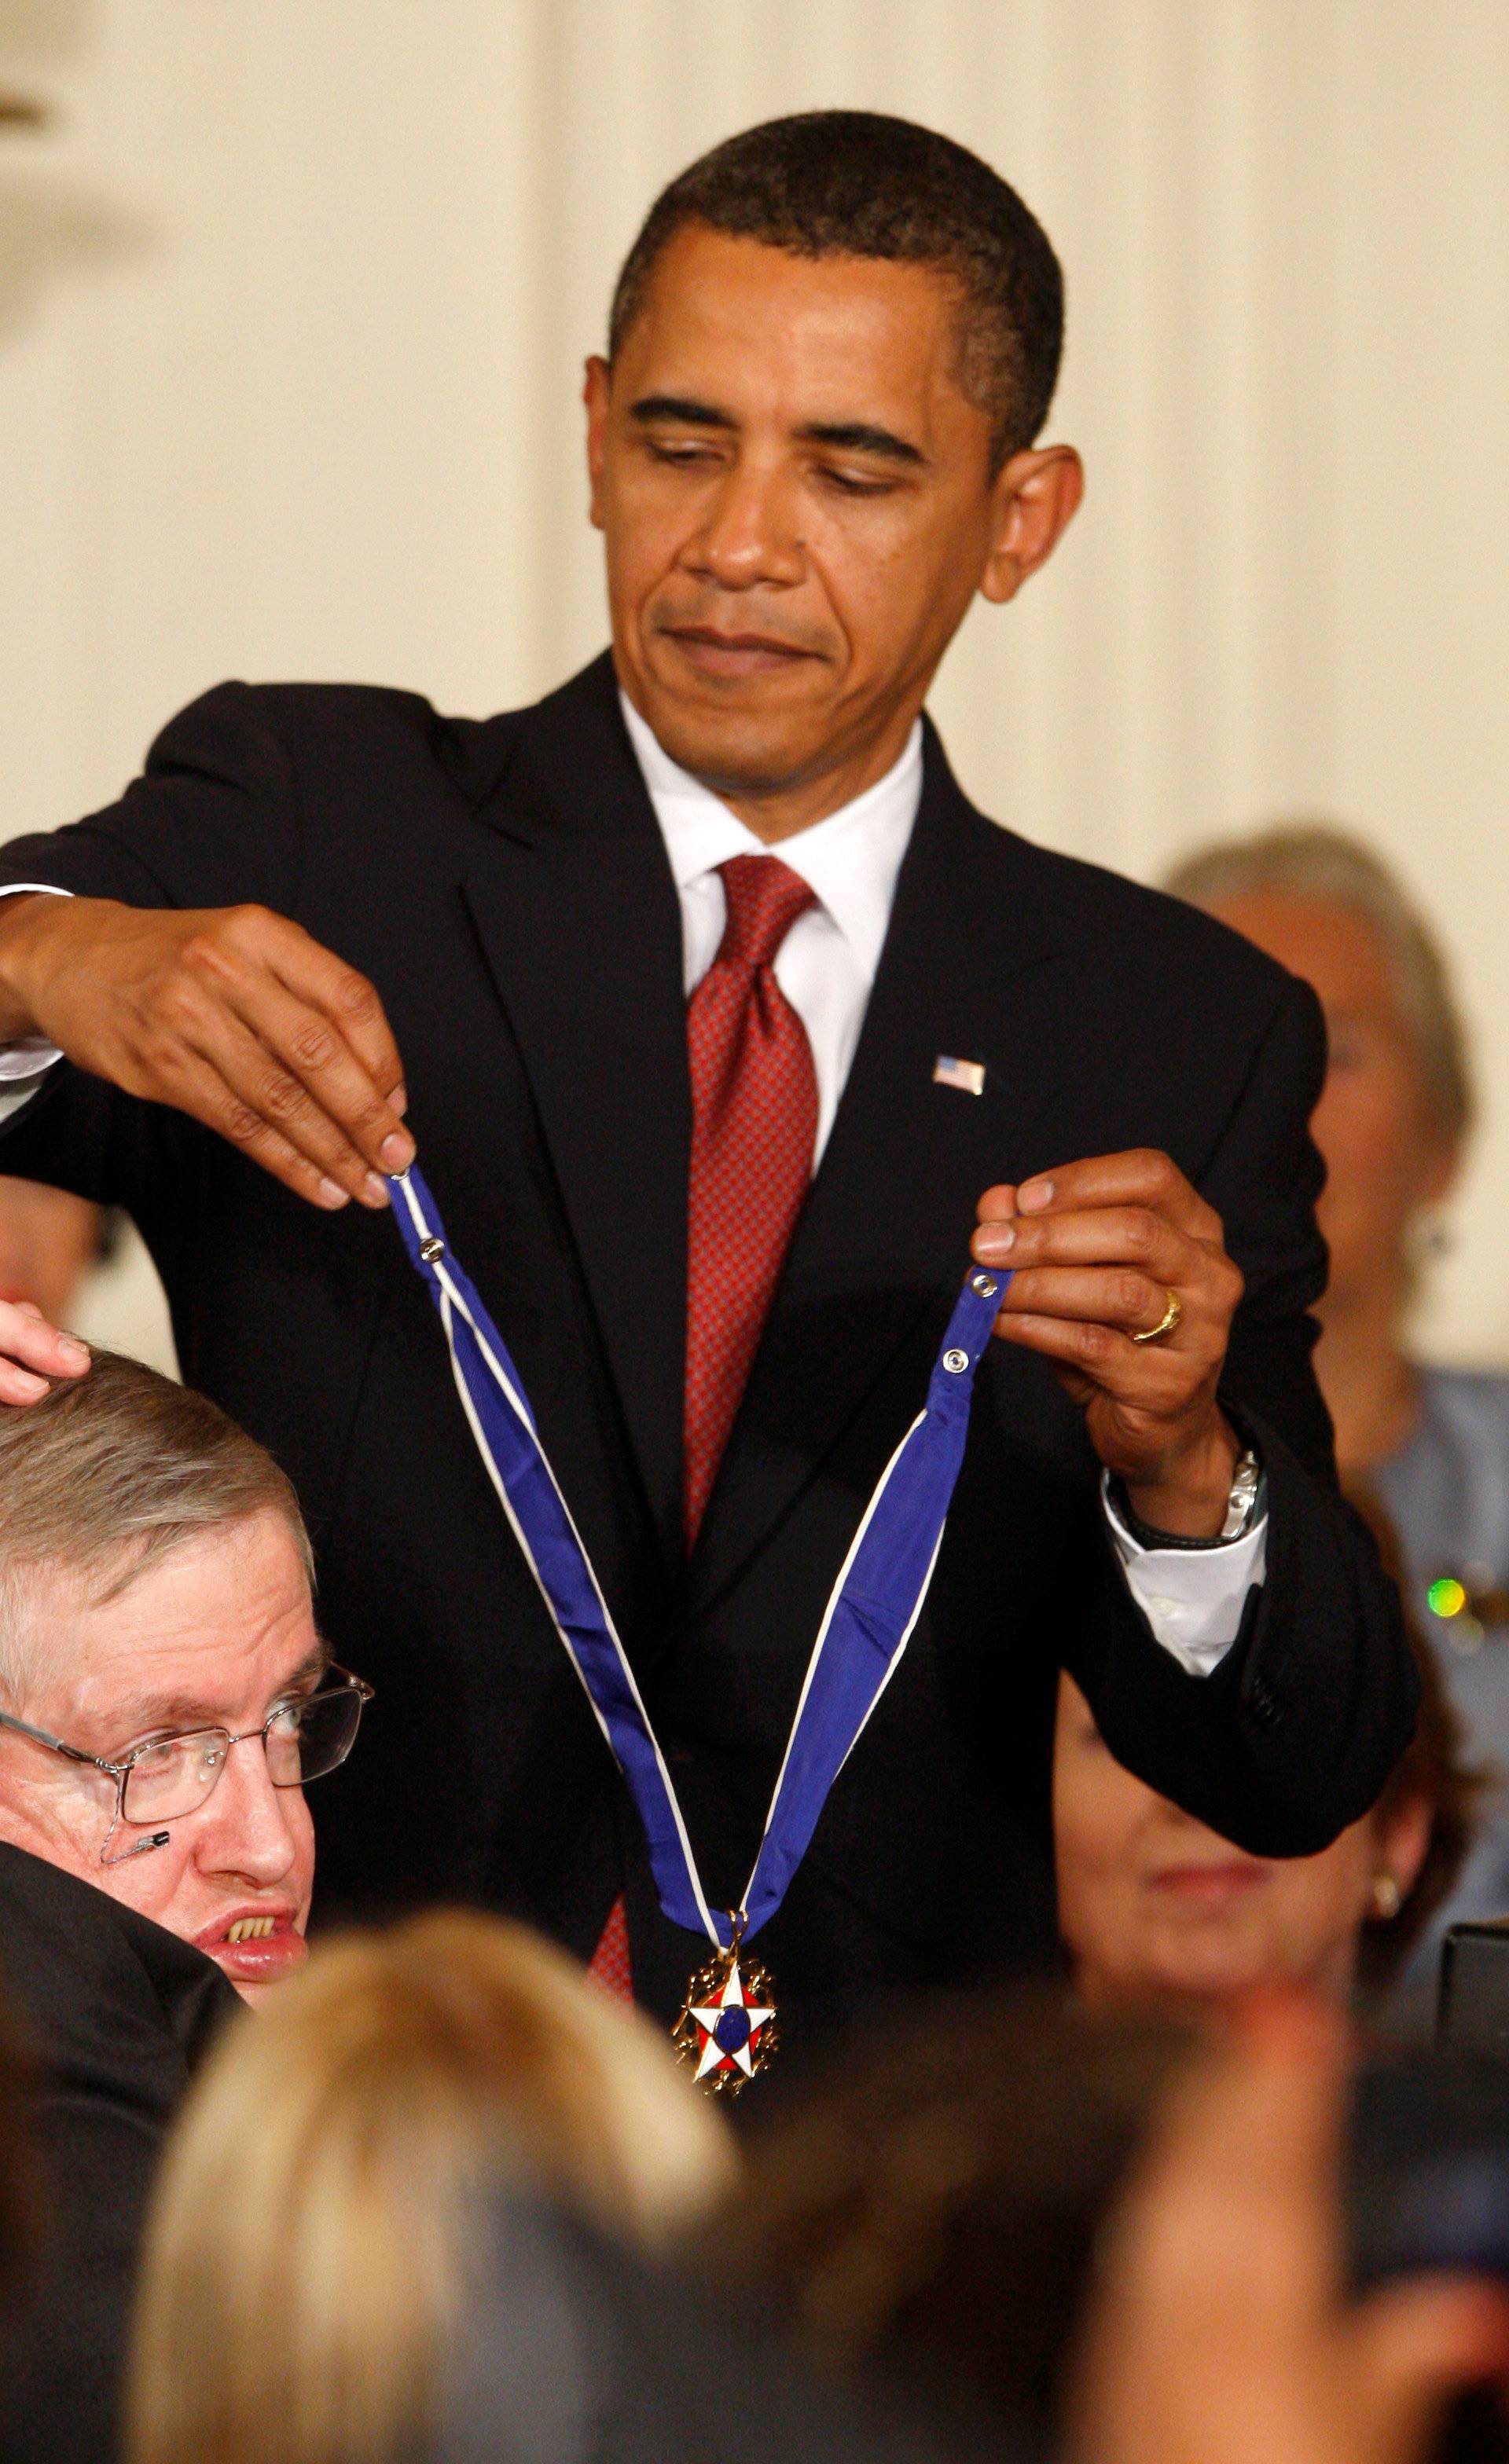 FILE PHOTO: U.S. President Obama presents the medal of freedom to Stephen Hawking in Washington